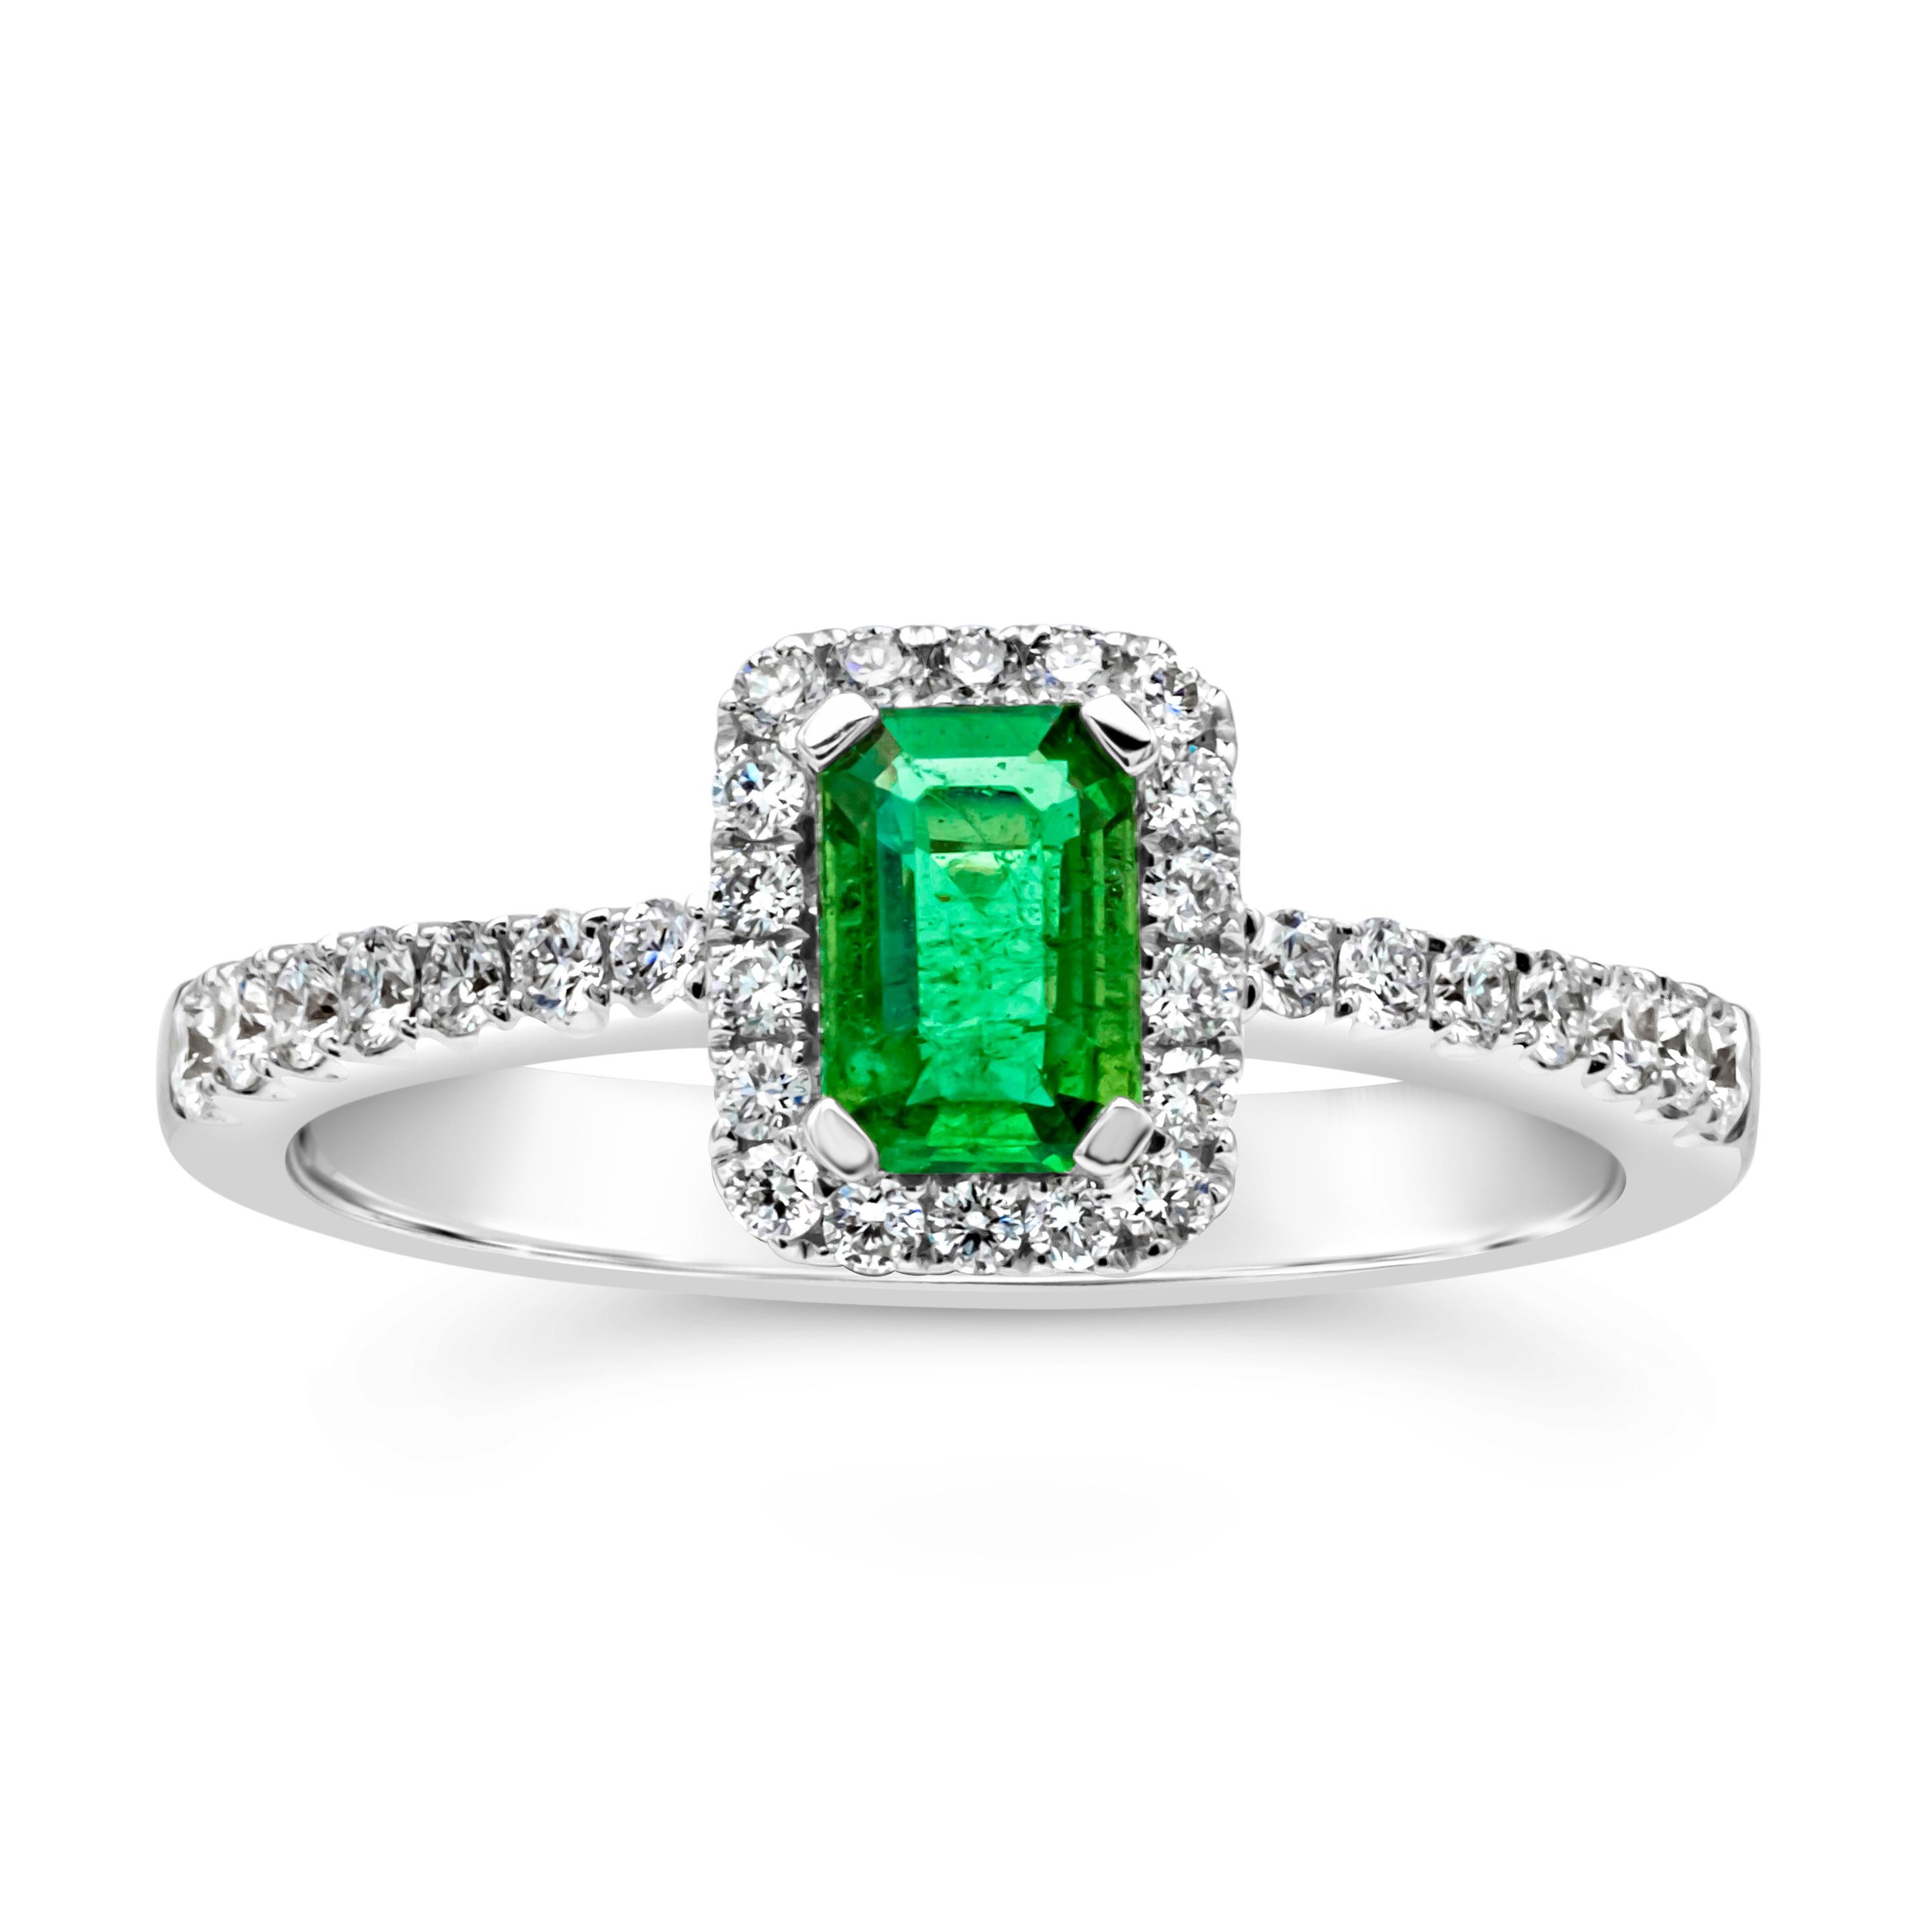 An appealing halo engagement ring style showcasing an emerald cut green emerald weighing 0.49 carats total, set in a four prong basket setting. Elegantly surrounded by a row of brilliant round diamonds that continues on to the shank of the ring